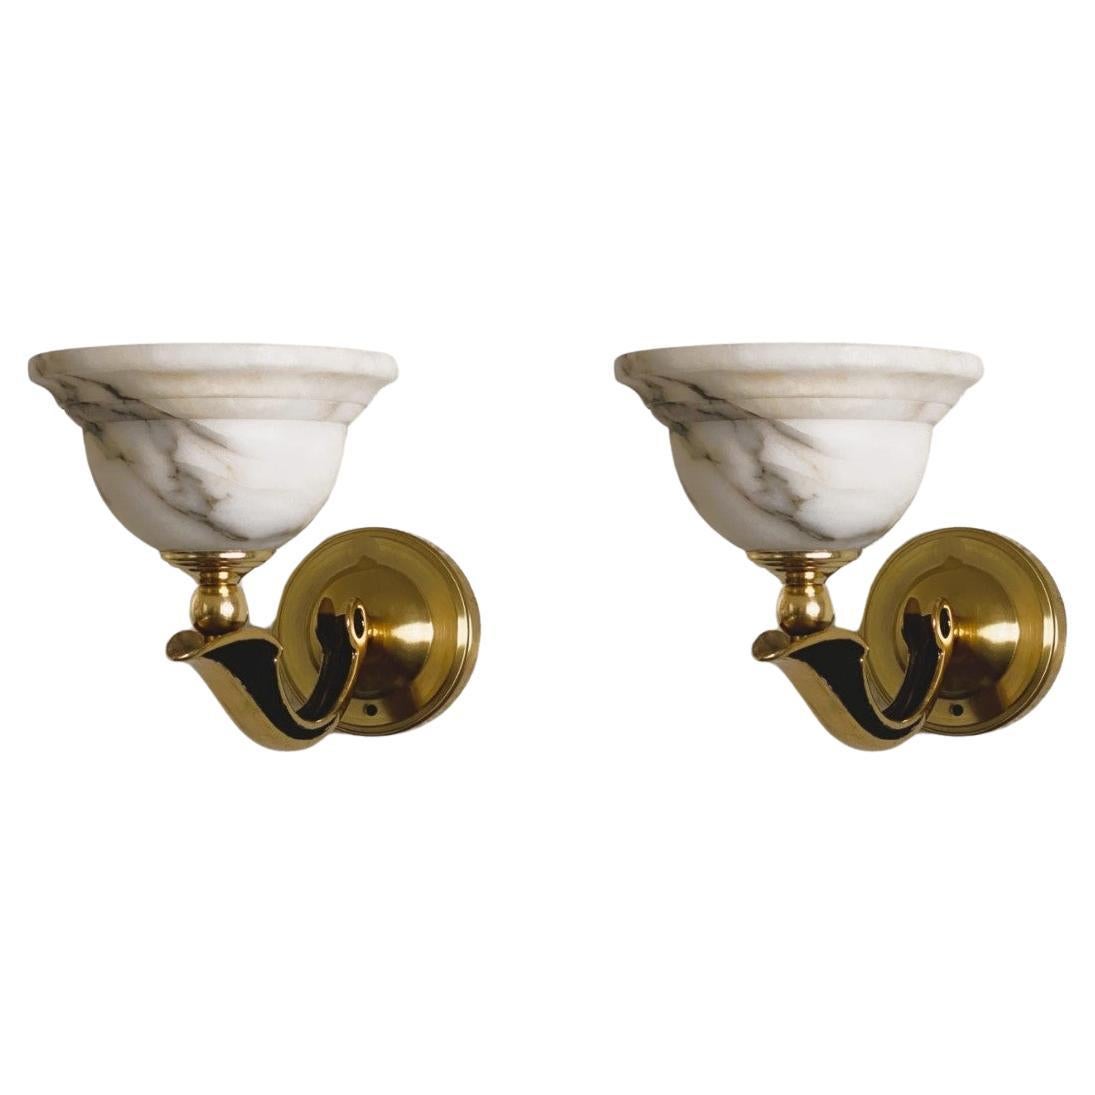 Pair of French Art Deco White Alabaster Brass Wall Sconces, 1930s